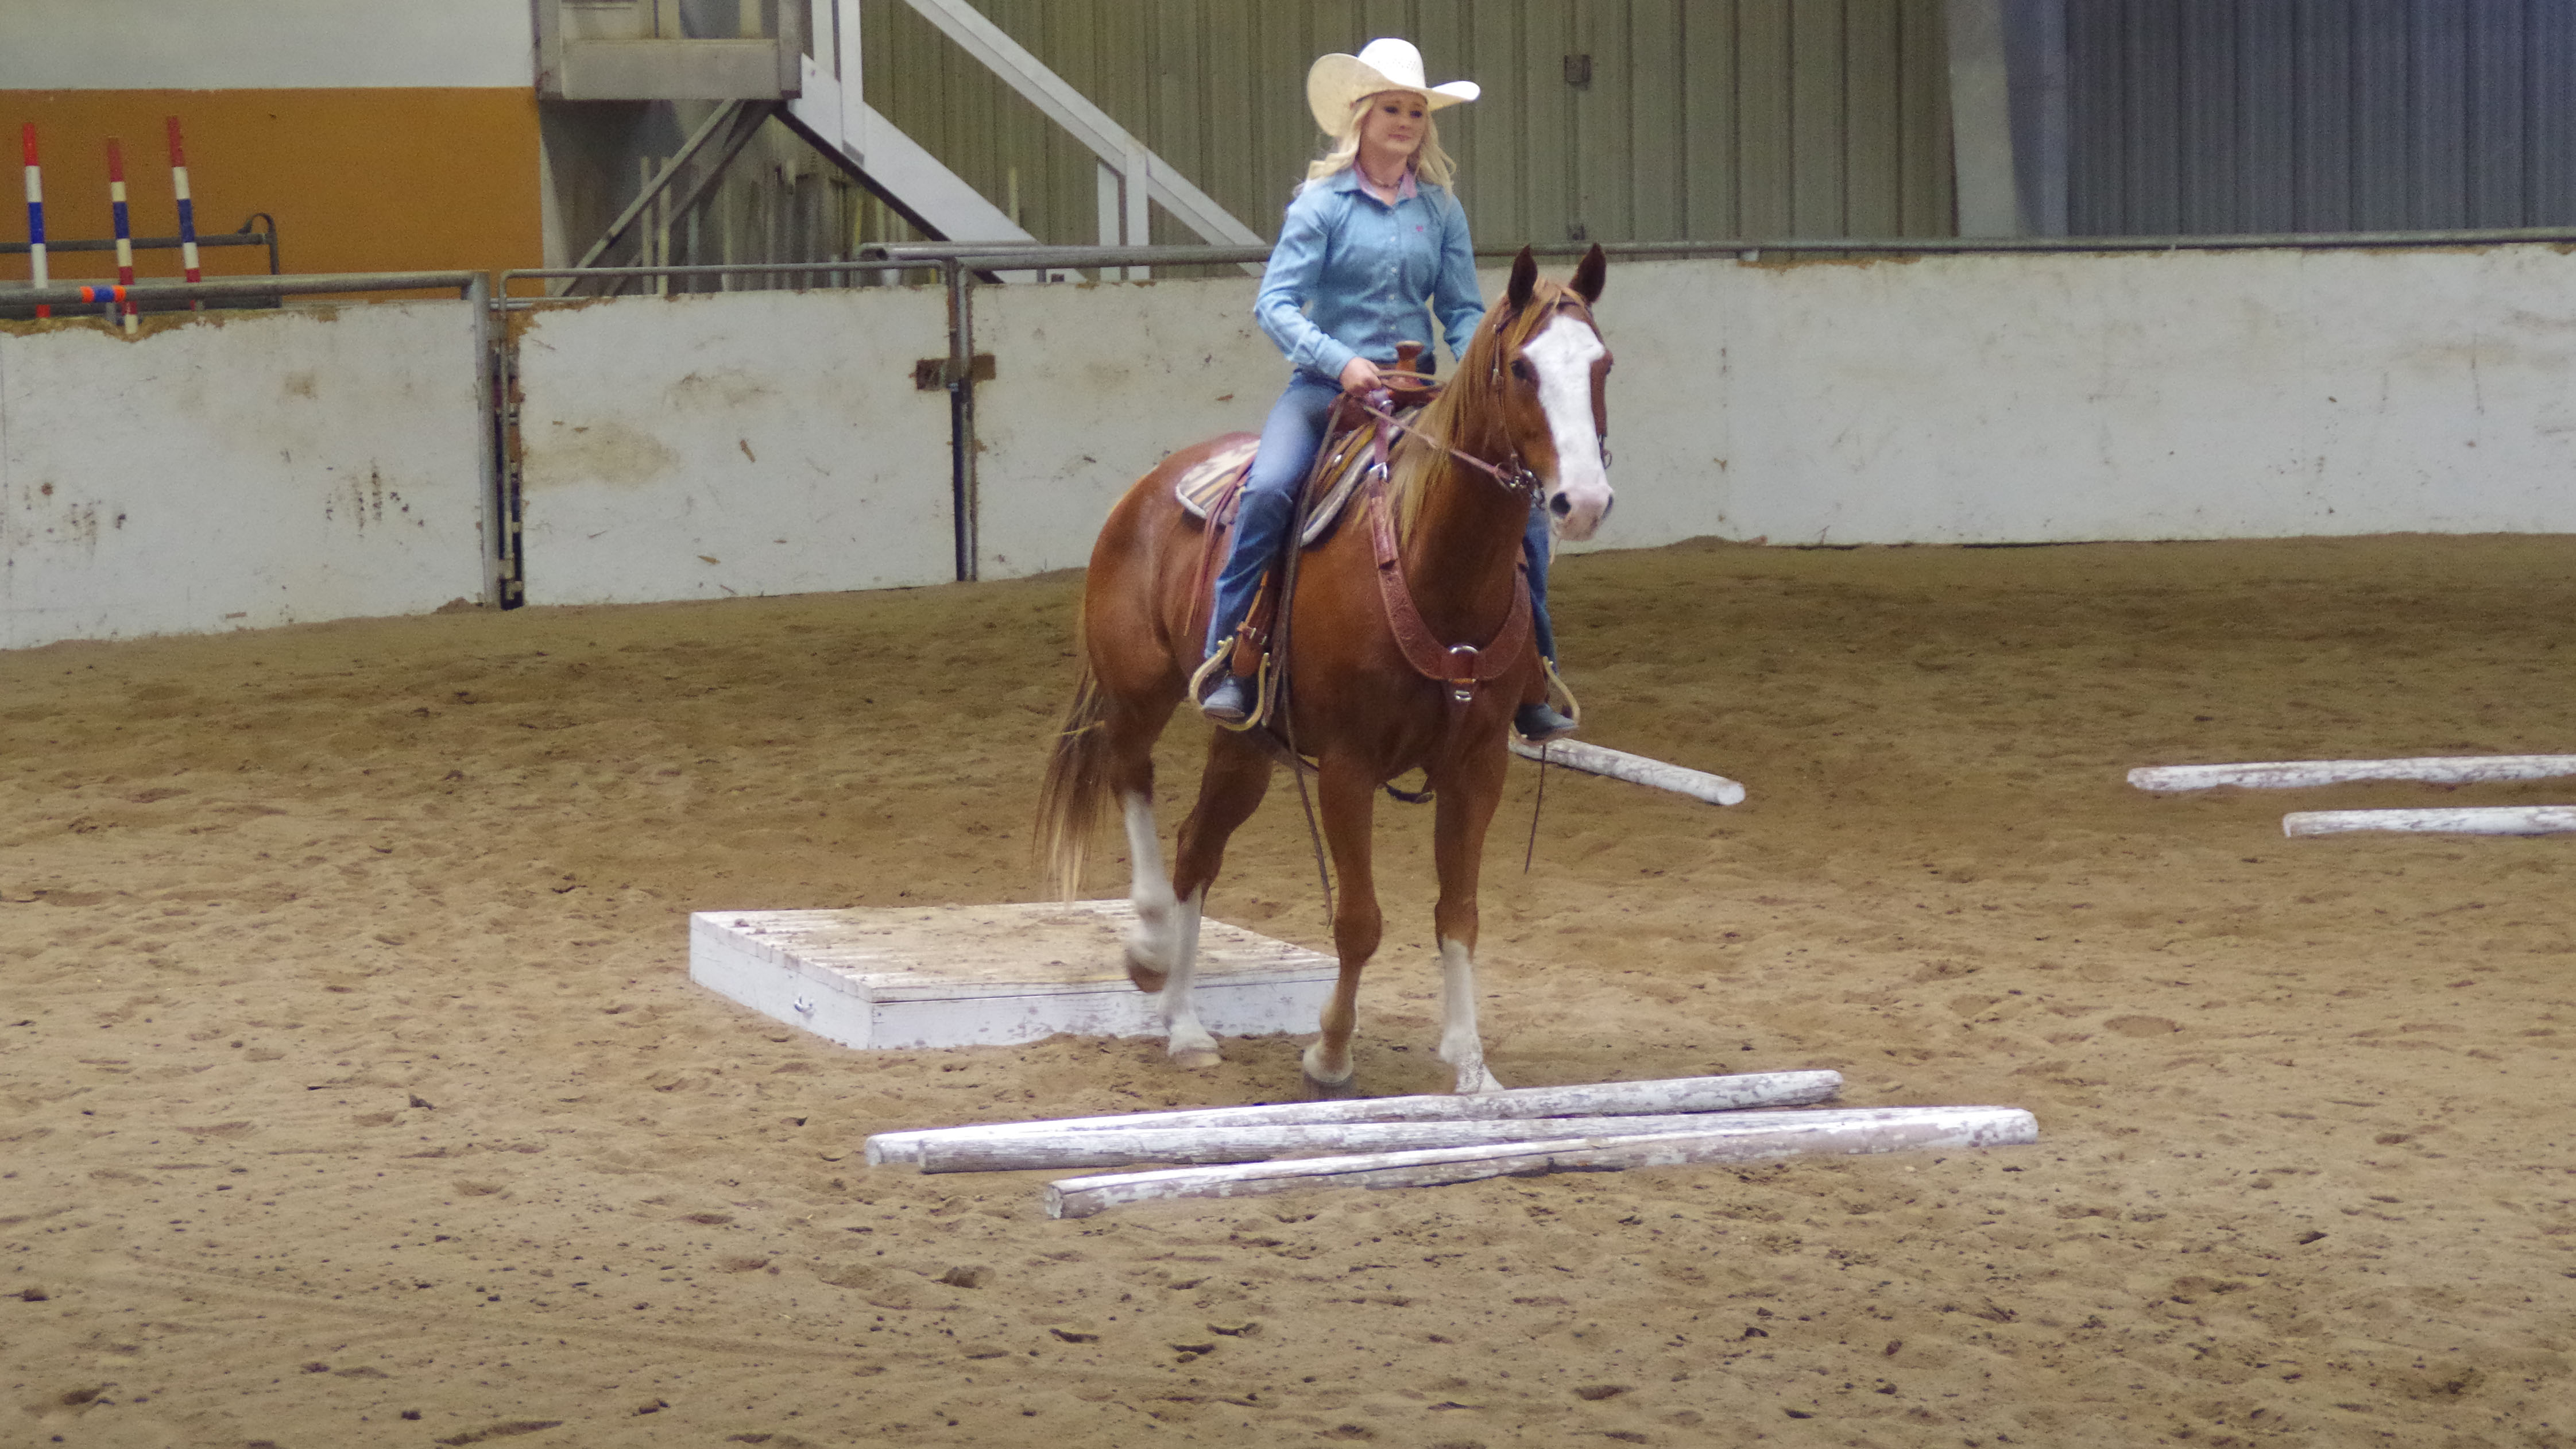 NCTA sophomore Addison Villwok, of Randolph, walks her horse Baxter through obstacles in the Ranch Trail Course at a recent stock horse versatility show. (Kelly Bennett photo for NCTA)   